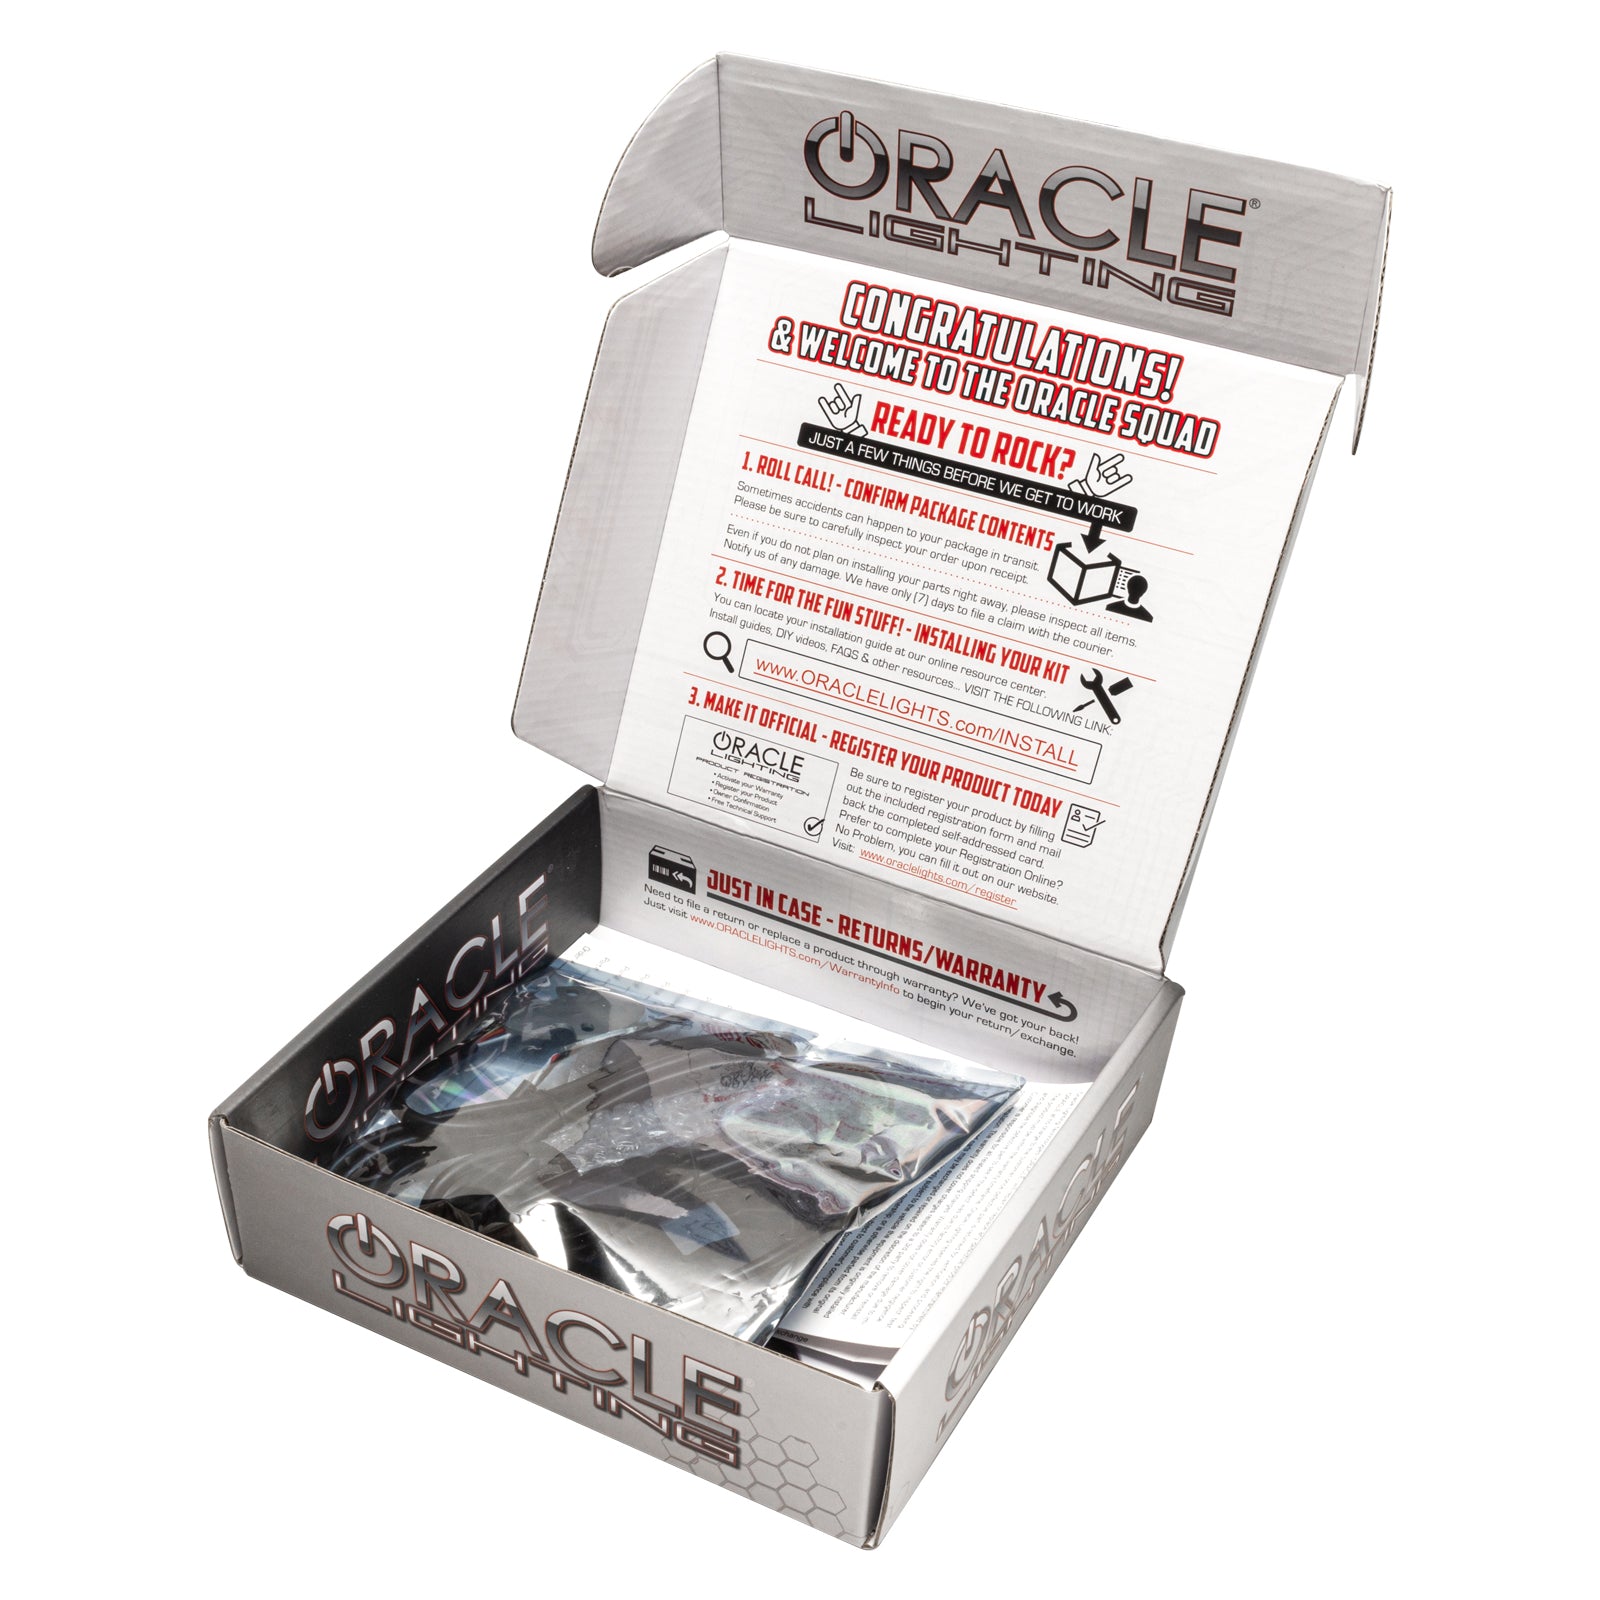 ORACLE Lighting 4 Pin 6' Extension Cable - ColorSHIFT Illuminated Wheel Rings